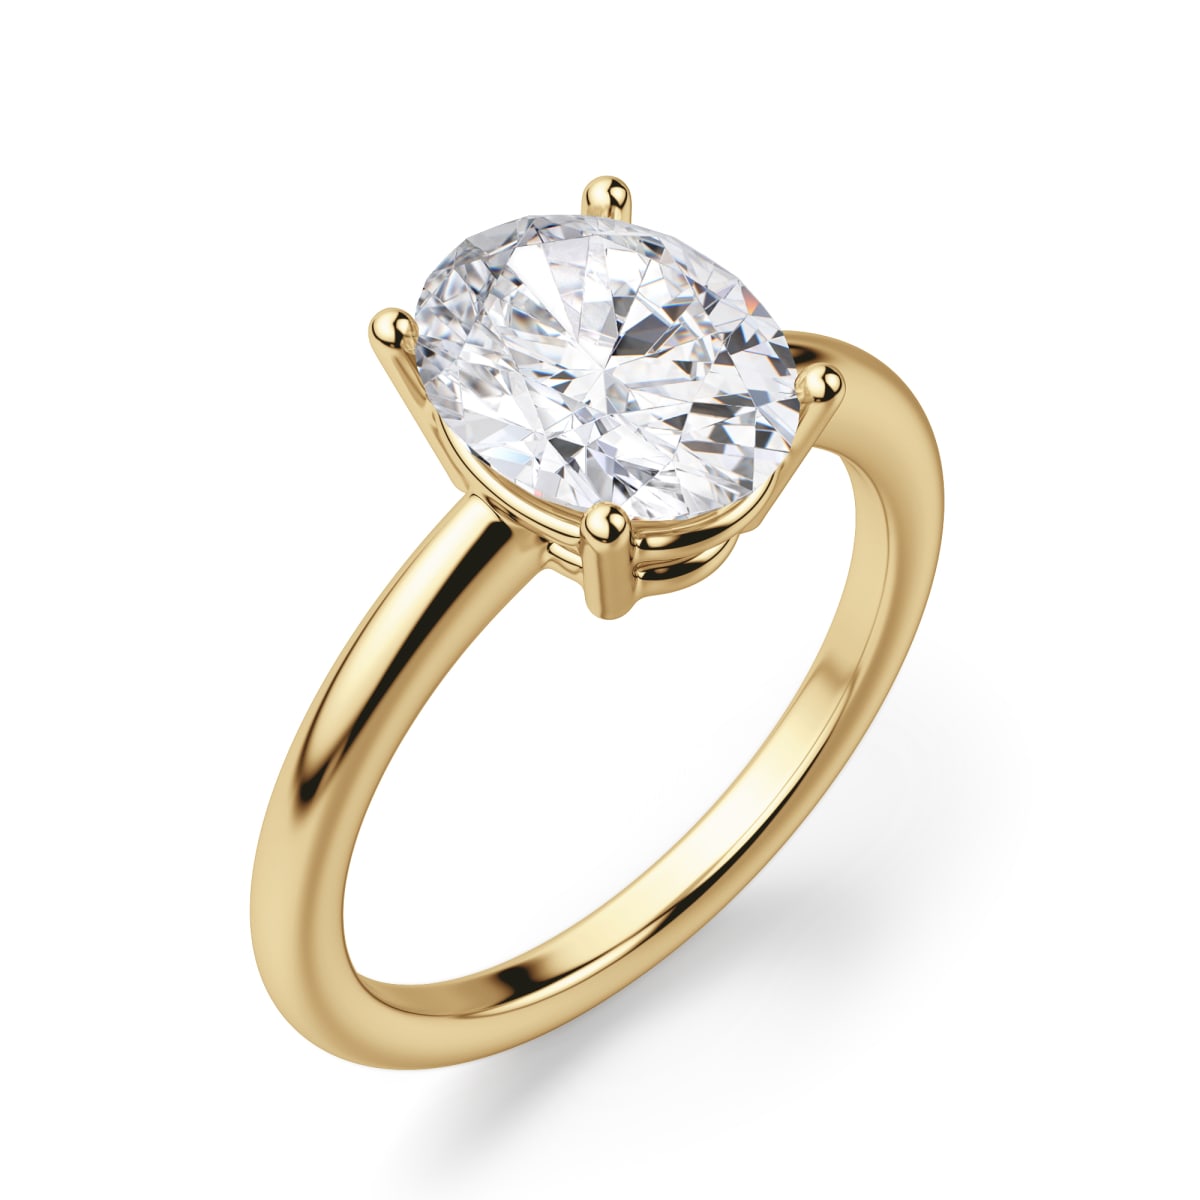 Basket Set Classic Engagement Ring With 2.50 ct Oval Center DEW, Ring Size 6, 14K Yellow Gold, Nexus Diamond Alternative